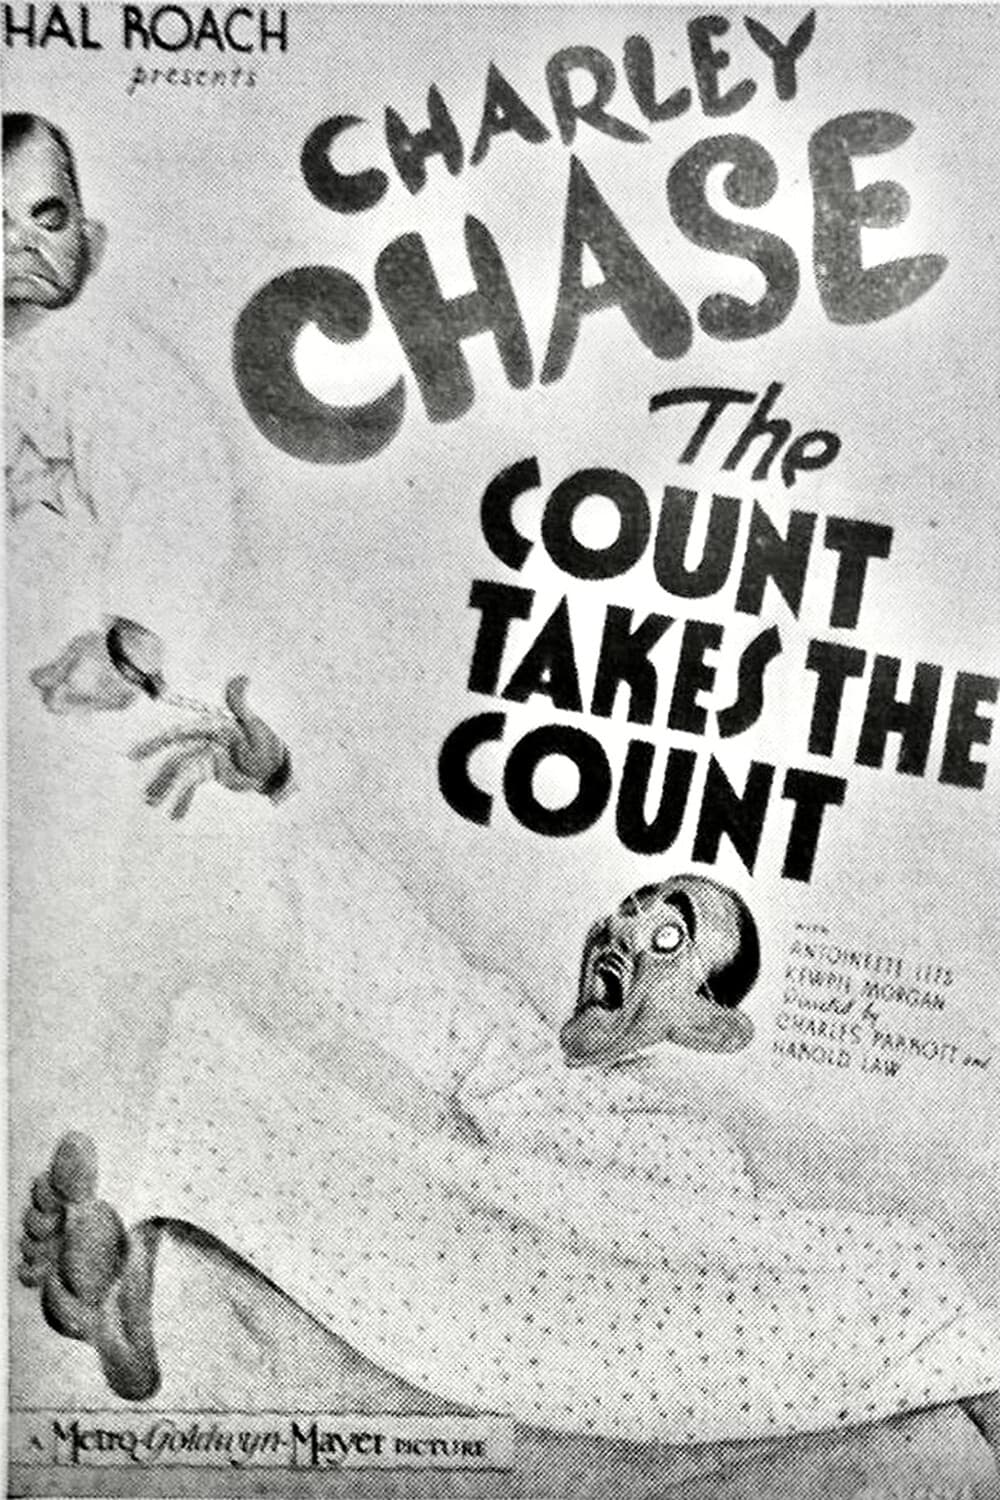 The Count Takes the Count (1936)